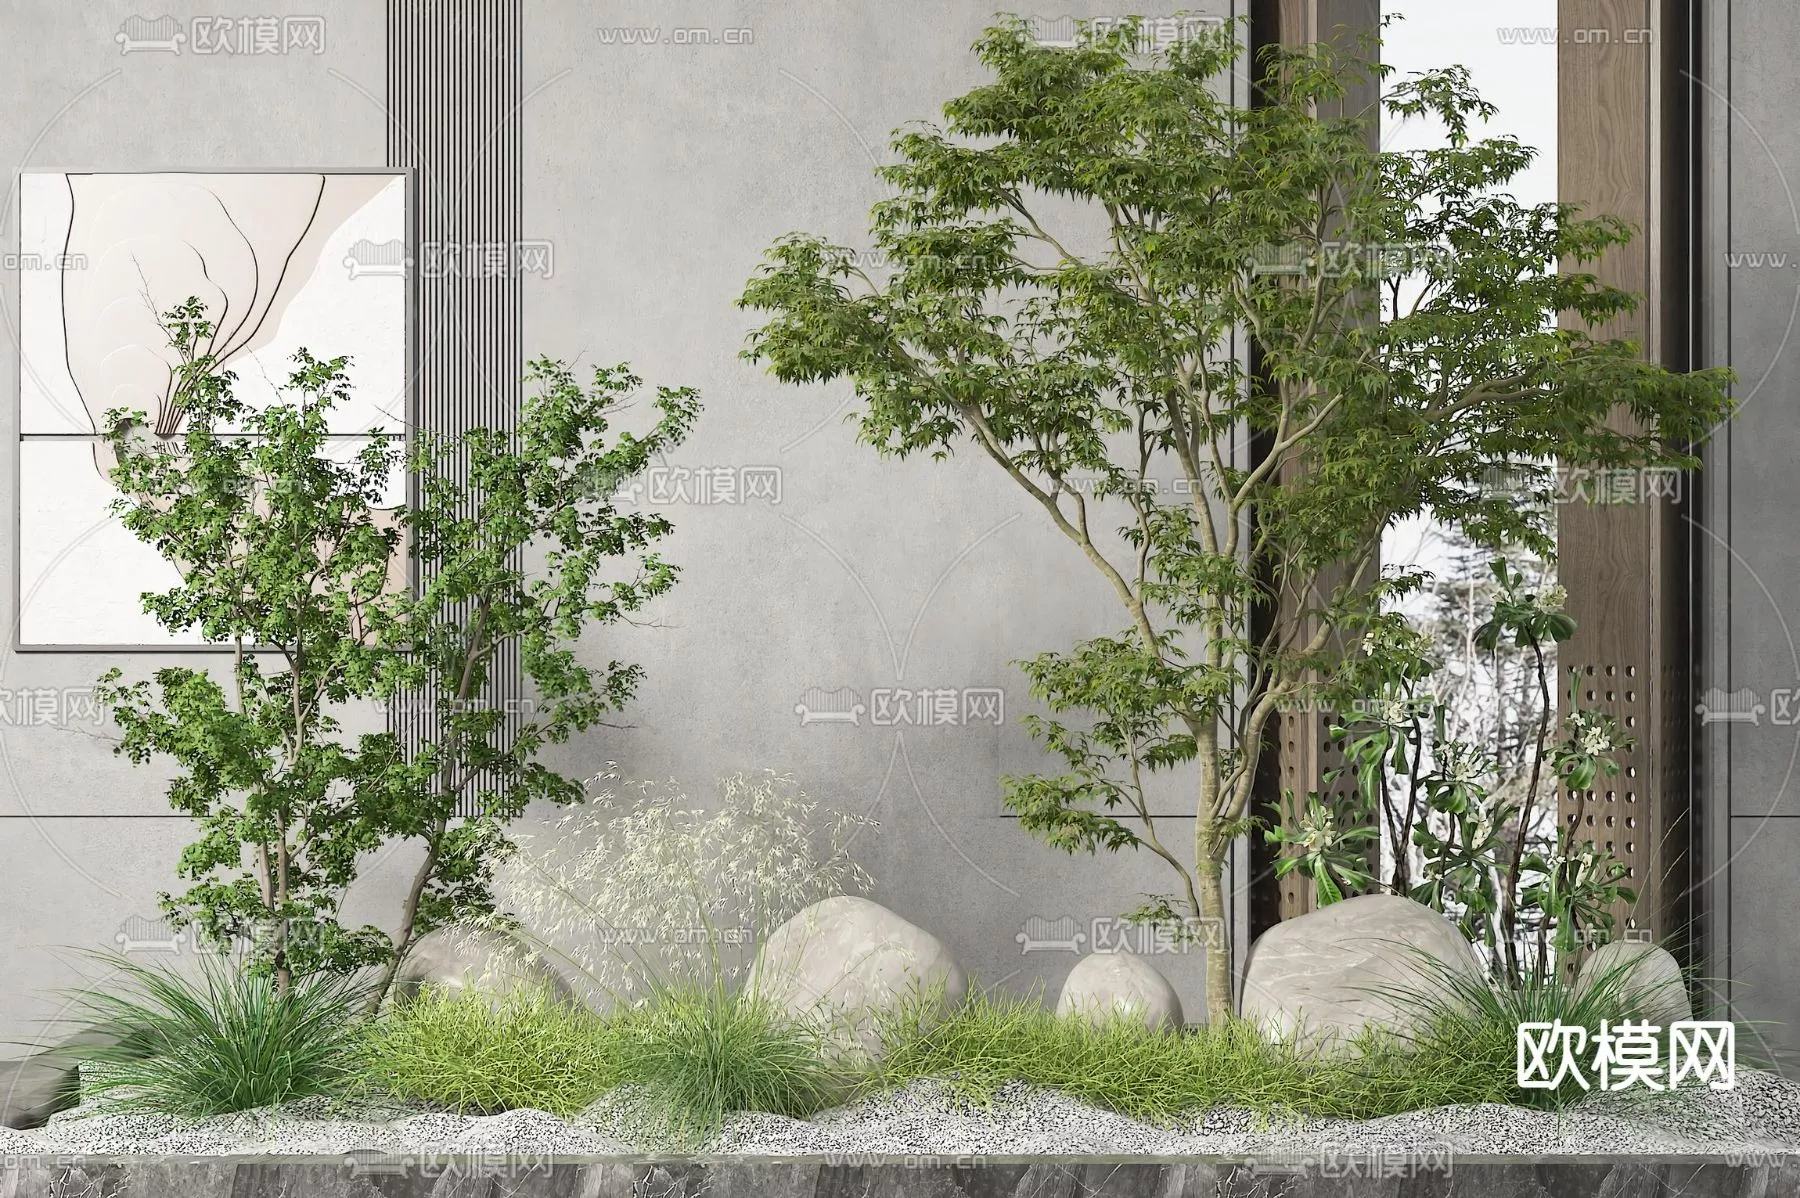 MODERN TREE - SKETCHUP 3D MODEL - VRAY OR ENSCAPE - ID15388